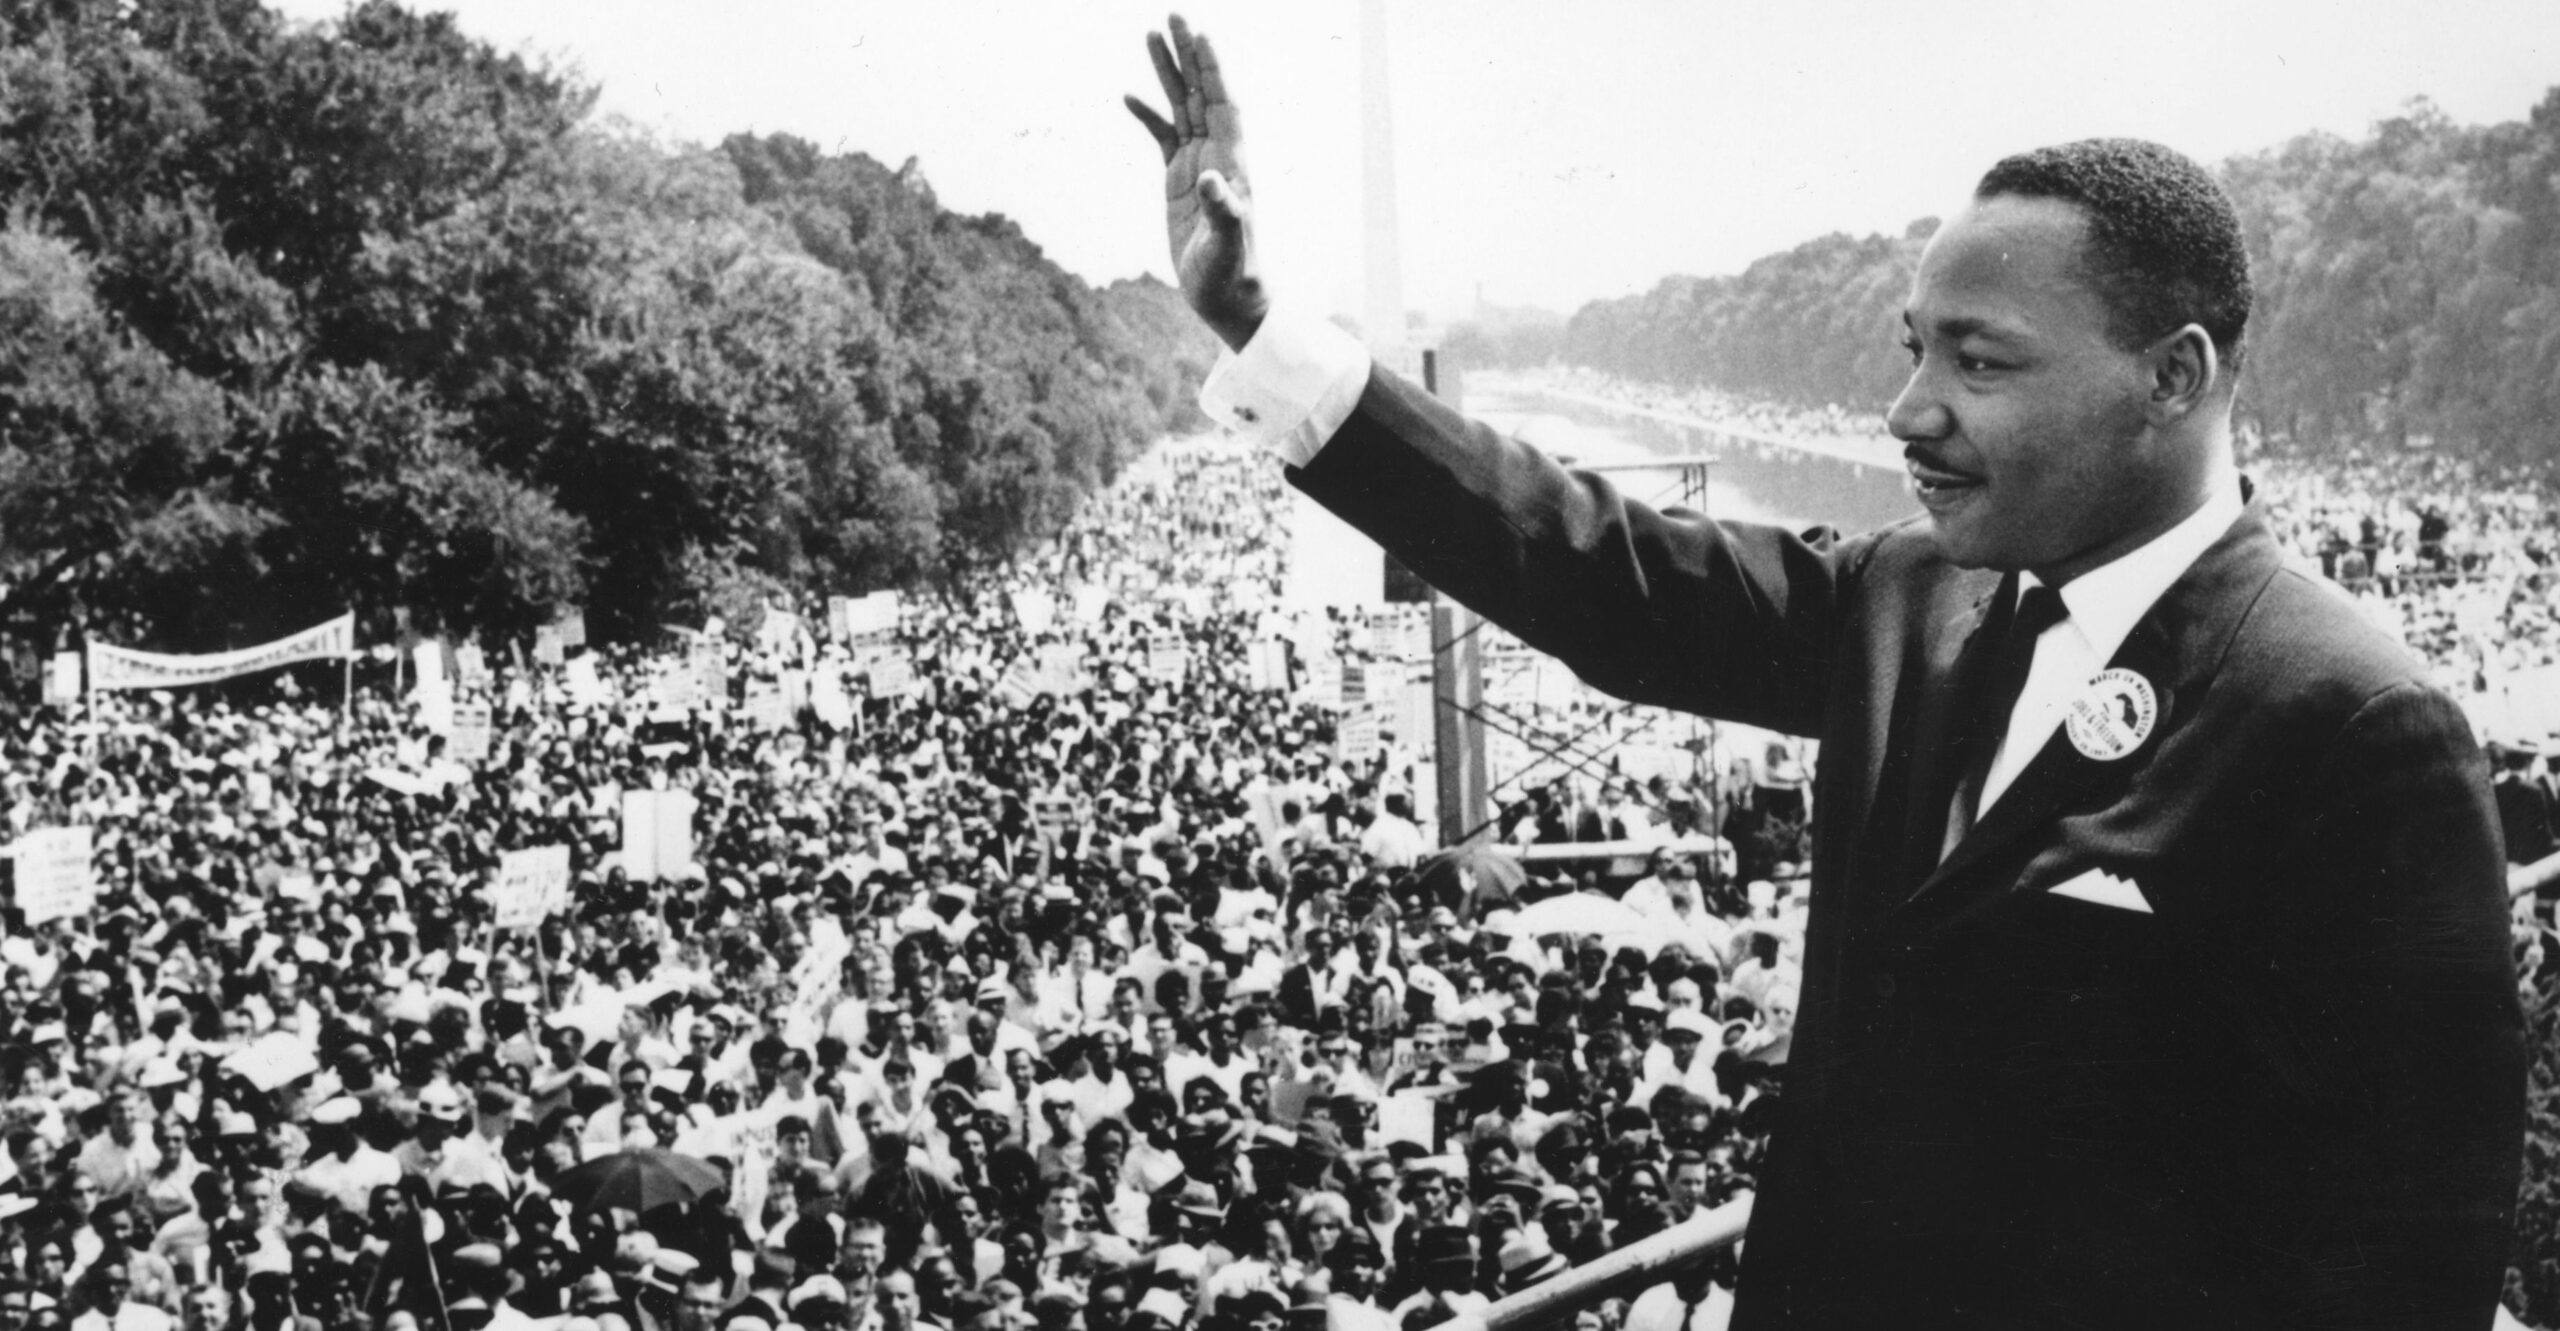 Truths, Ideals of MLK's Message Have Been Lost to Wokeism